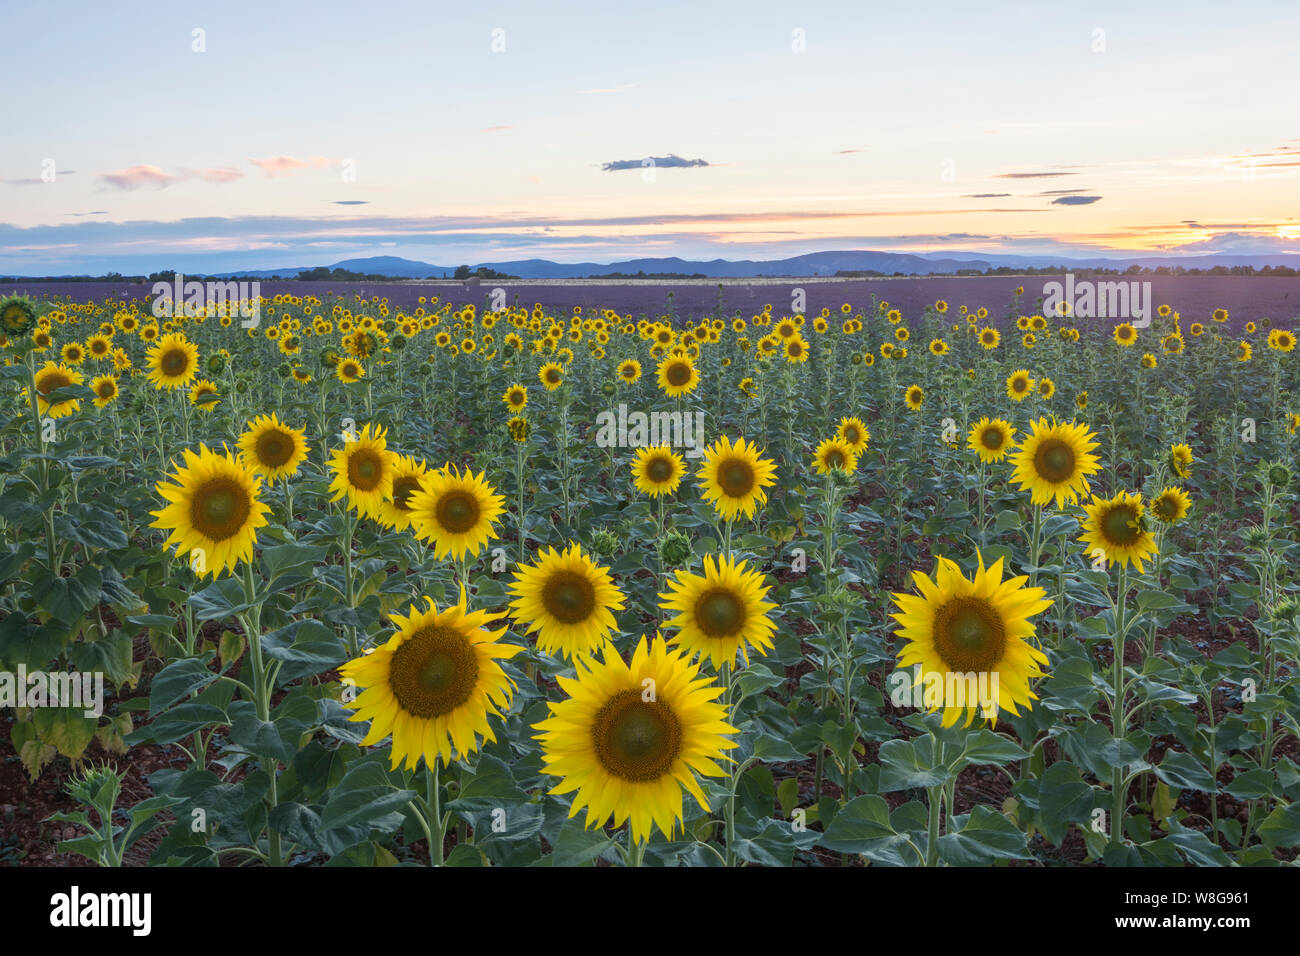 Lavender and sunflower field on the Plateau de Valensole, Provence, France. Stock Photo